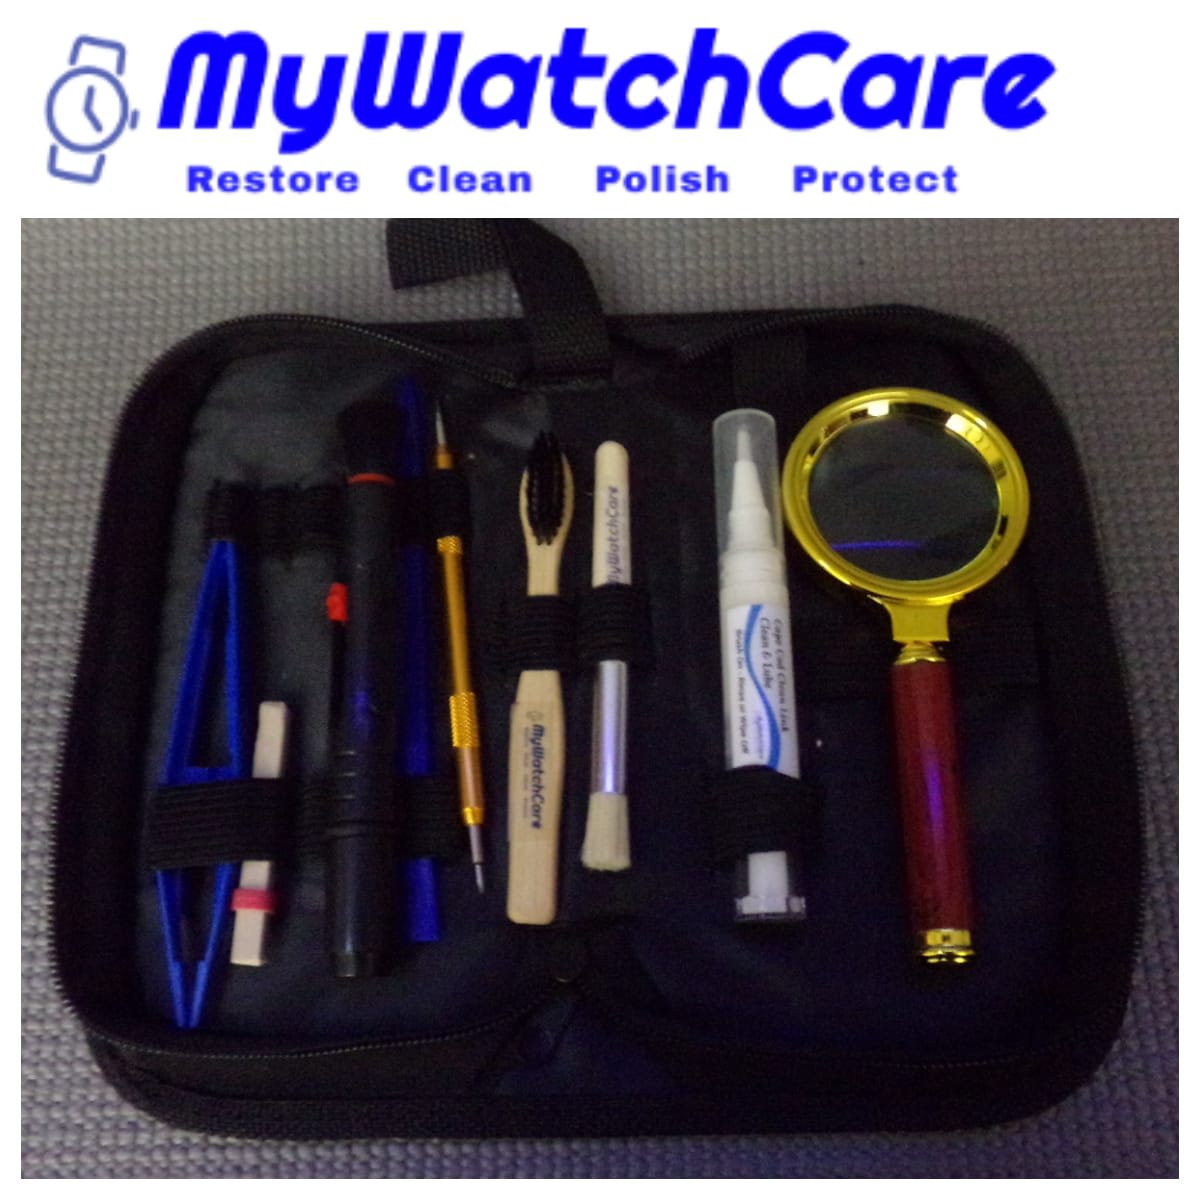 Watch & Jewelry Restore-Polish-Clean Care Kit - Clean & Polish Kits - My Watch  Care